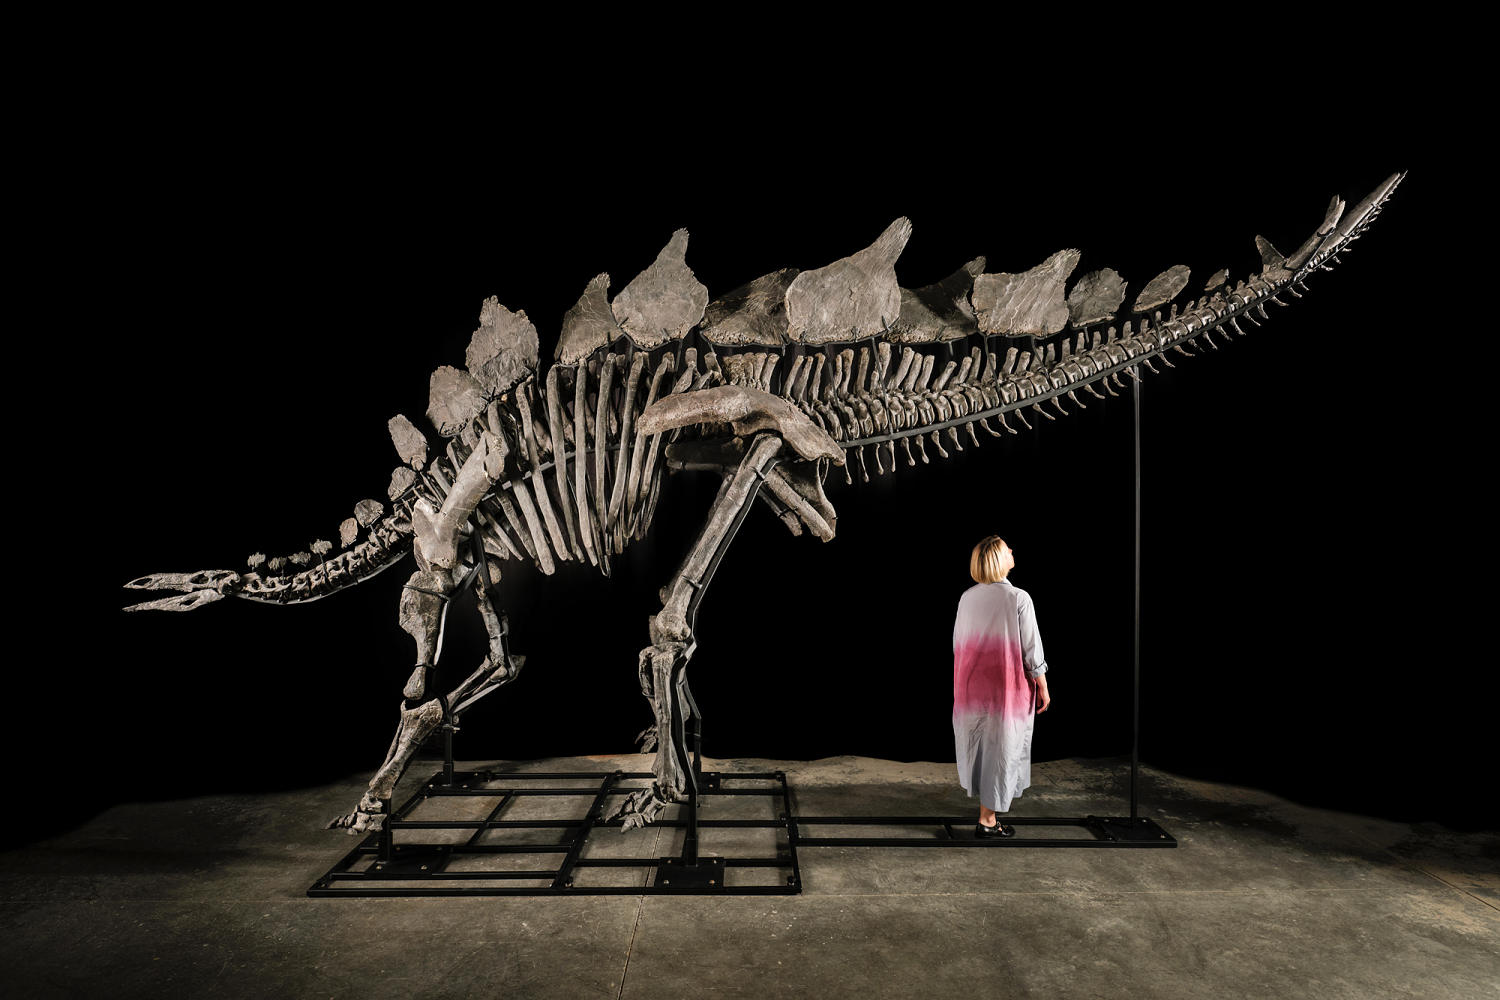 Near-complete Stegosaurus fossil sells for record $44 million at auction